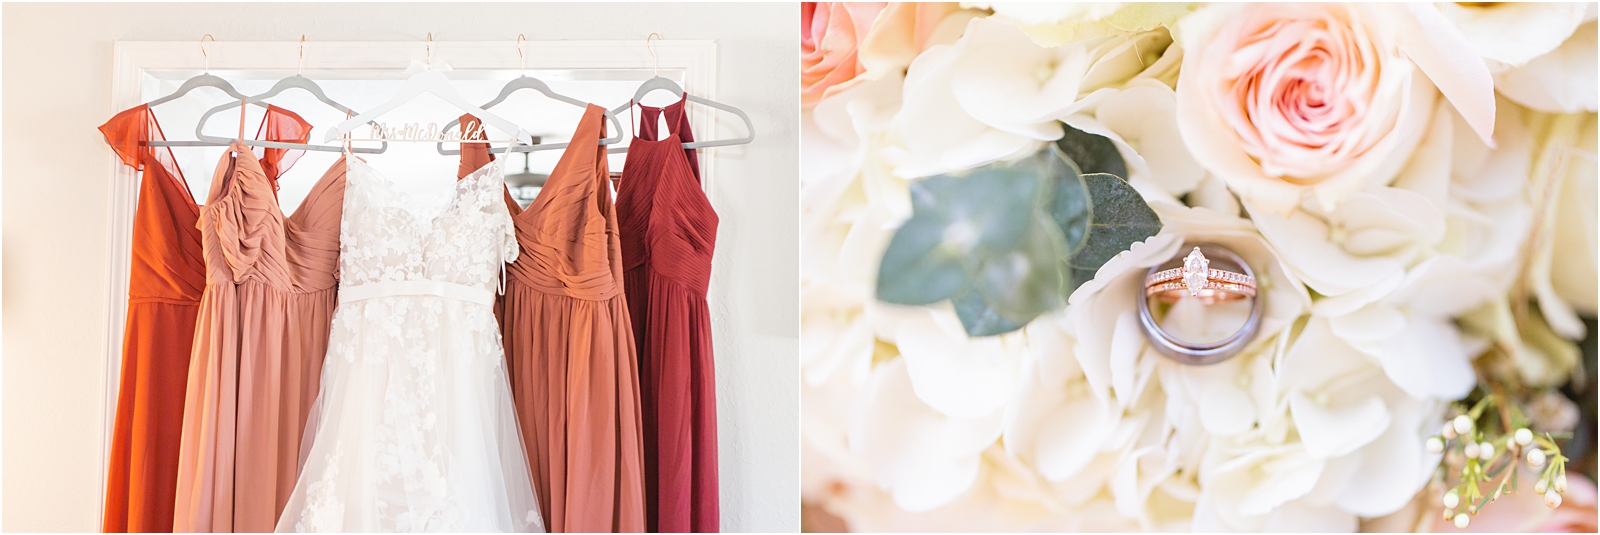 Bride and bridesmaids dresses hanging next to each other. Mauve, rust, and red. Up close detail image of wedding ring for Destination Wedding - TX